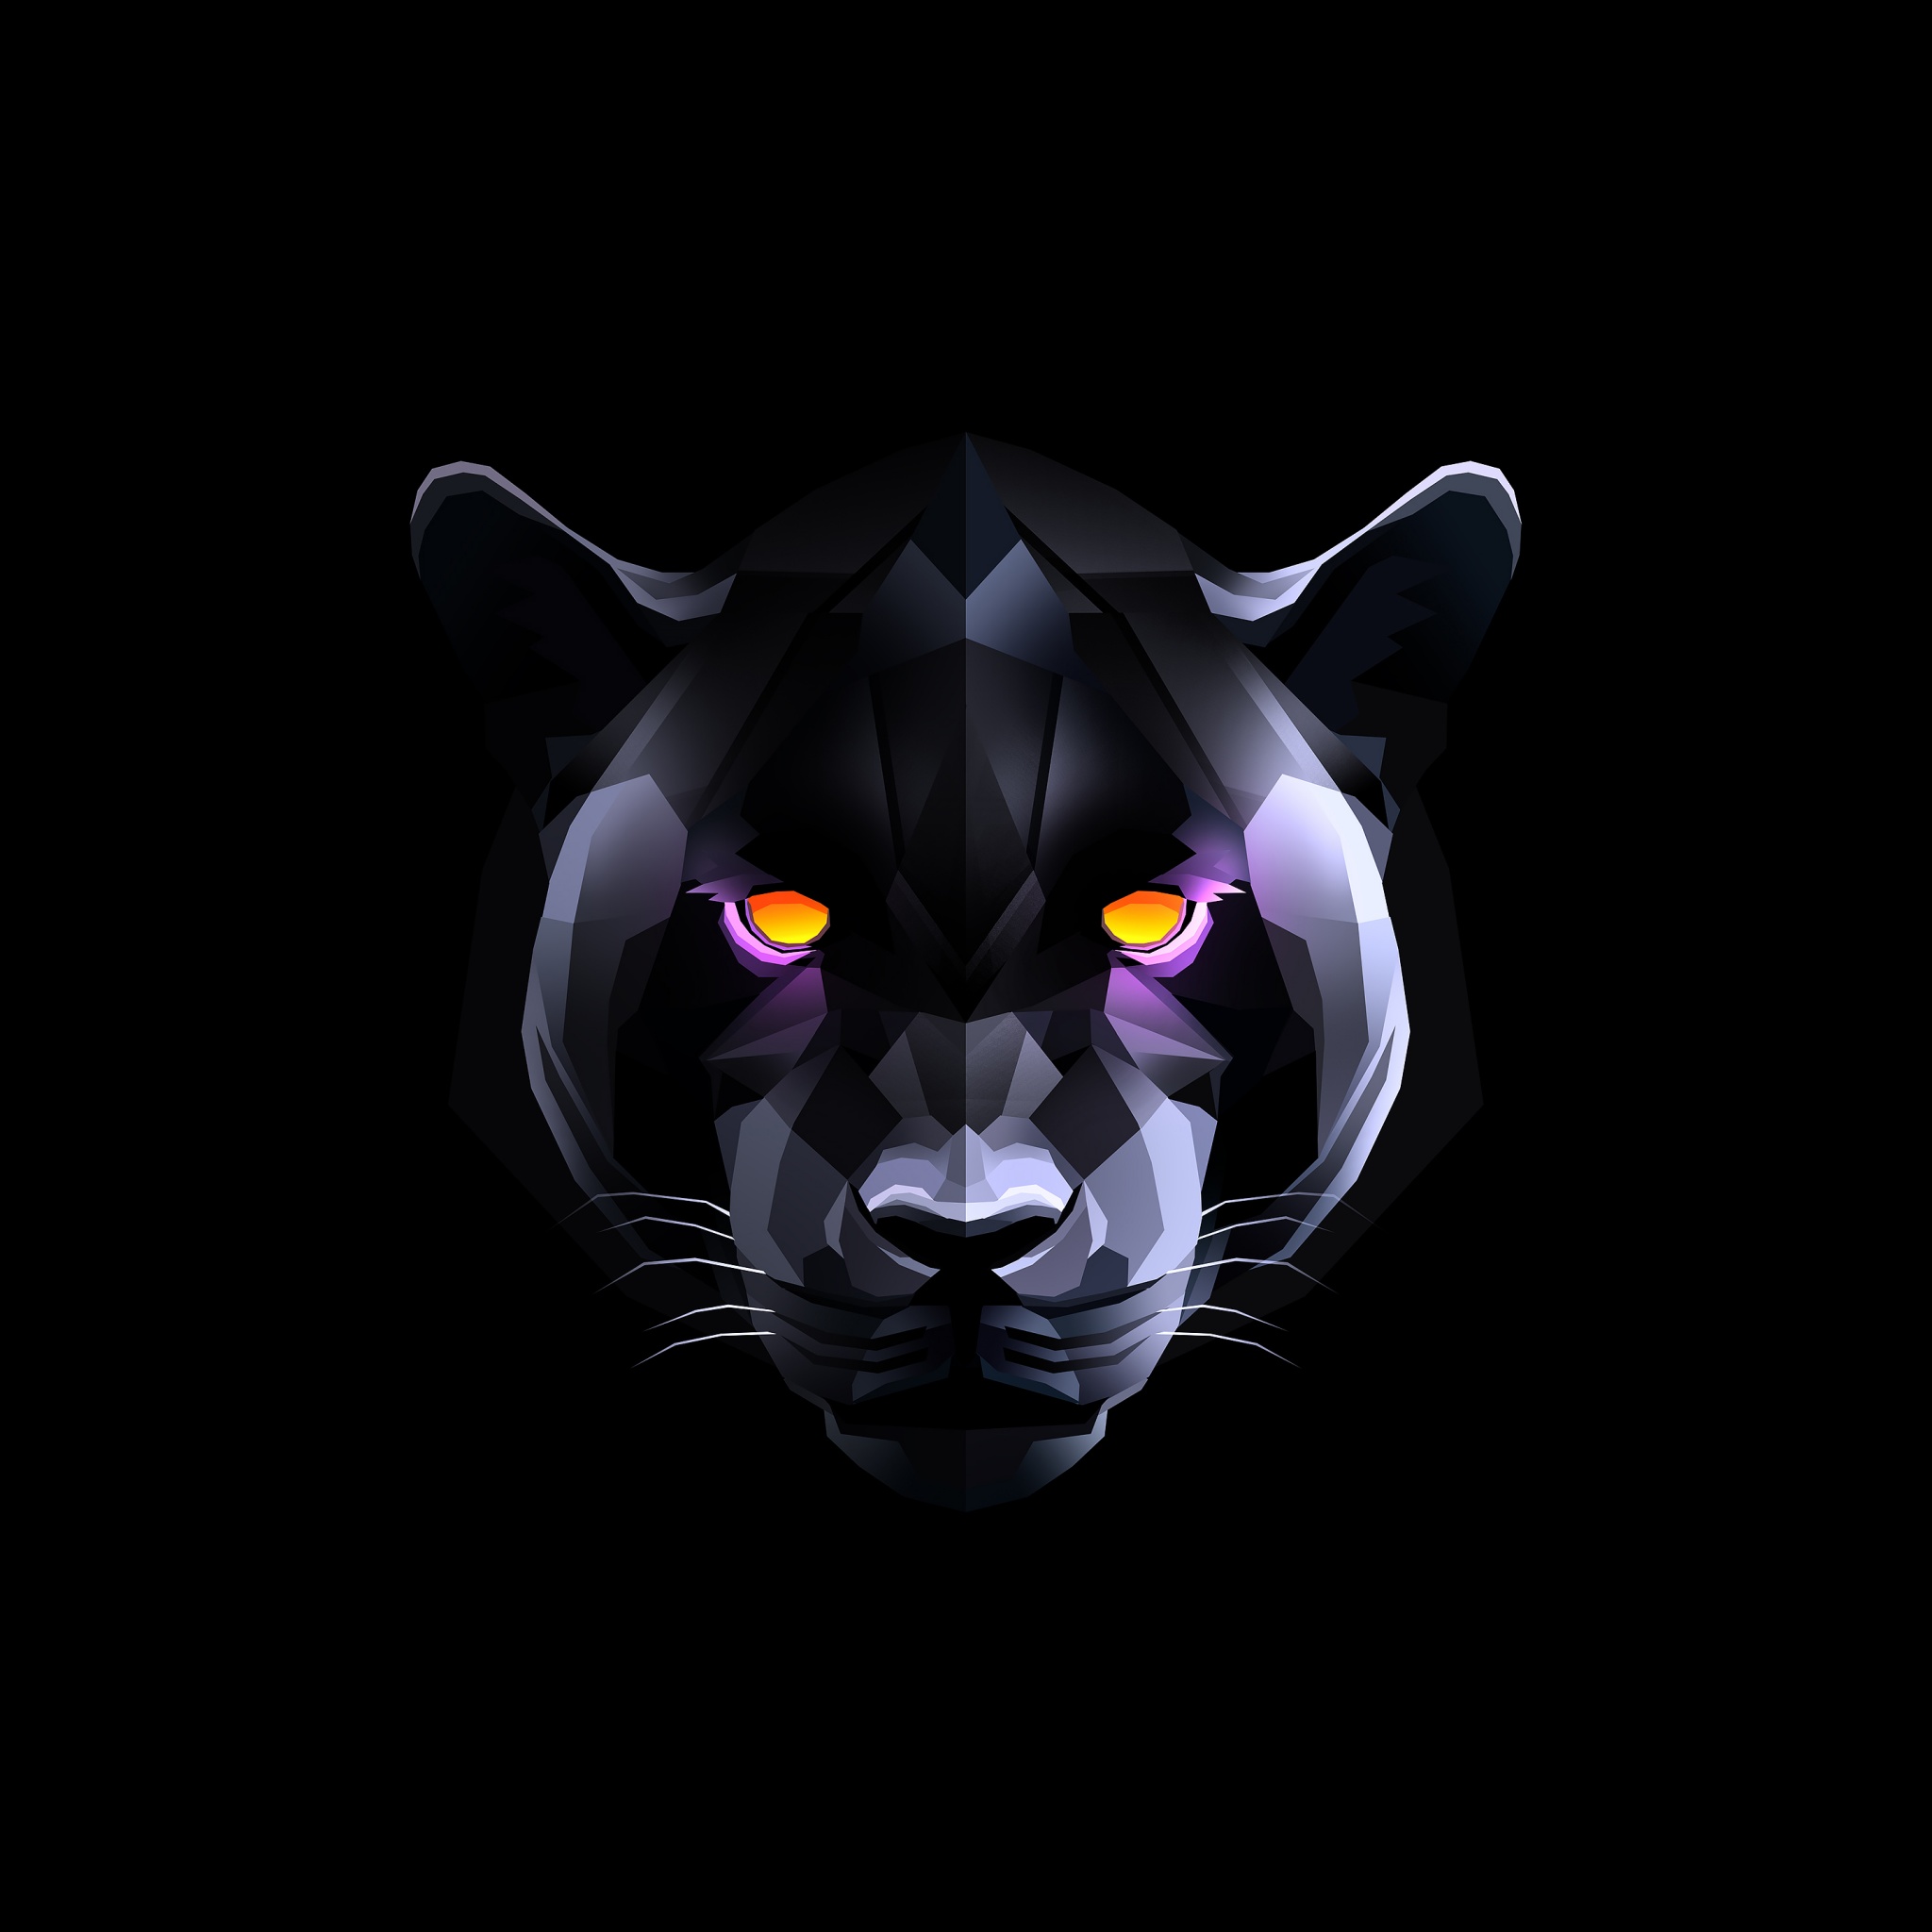 Black Panther On Tree - Wallpapers | DesiComments.com